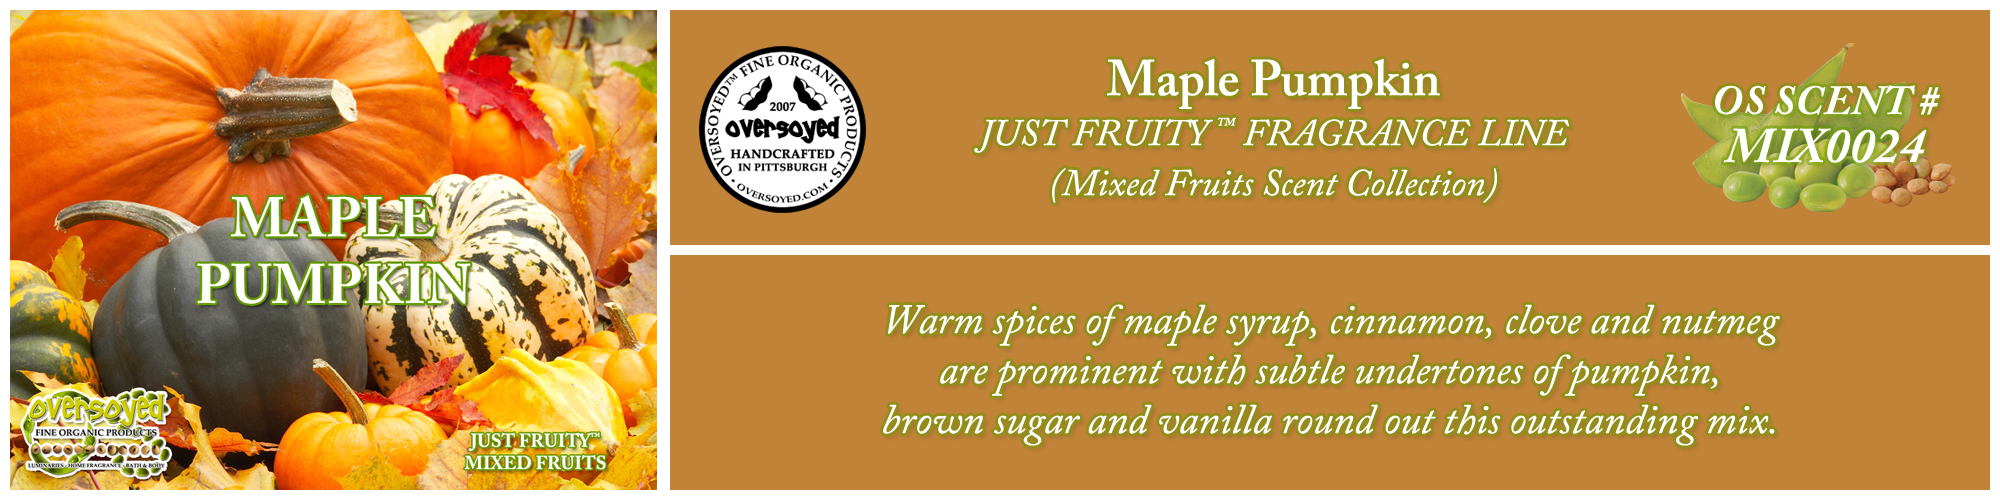 Maple Pumpkin Handcrafted Products Collection